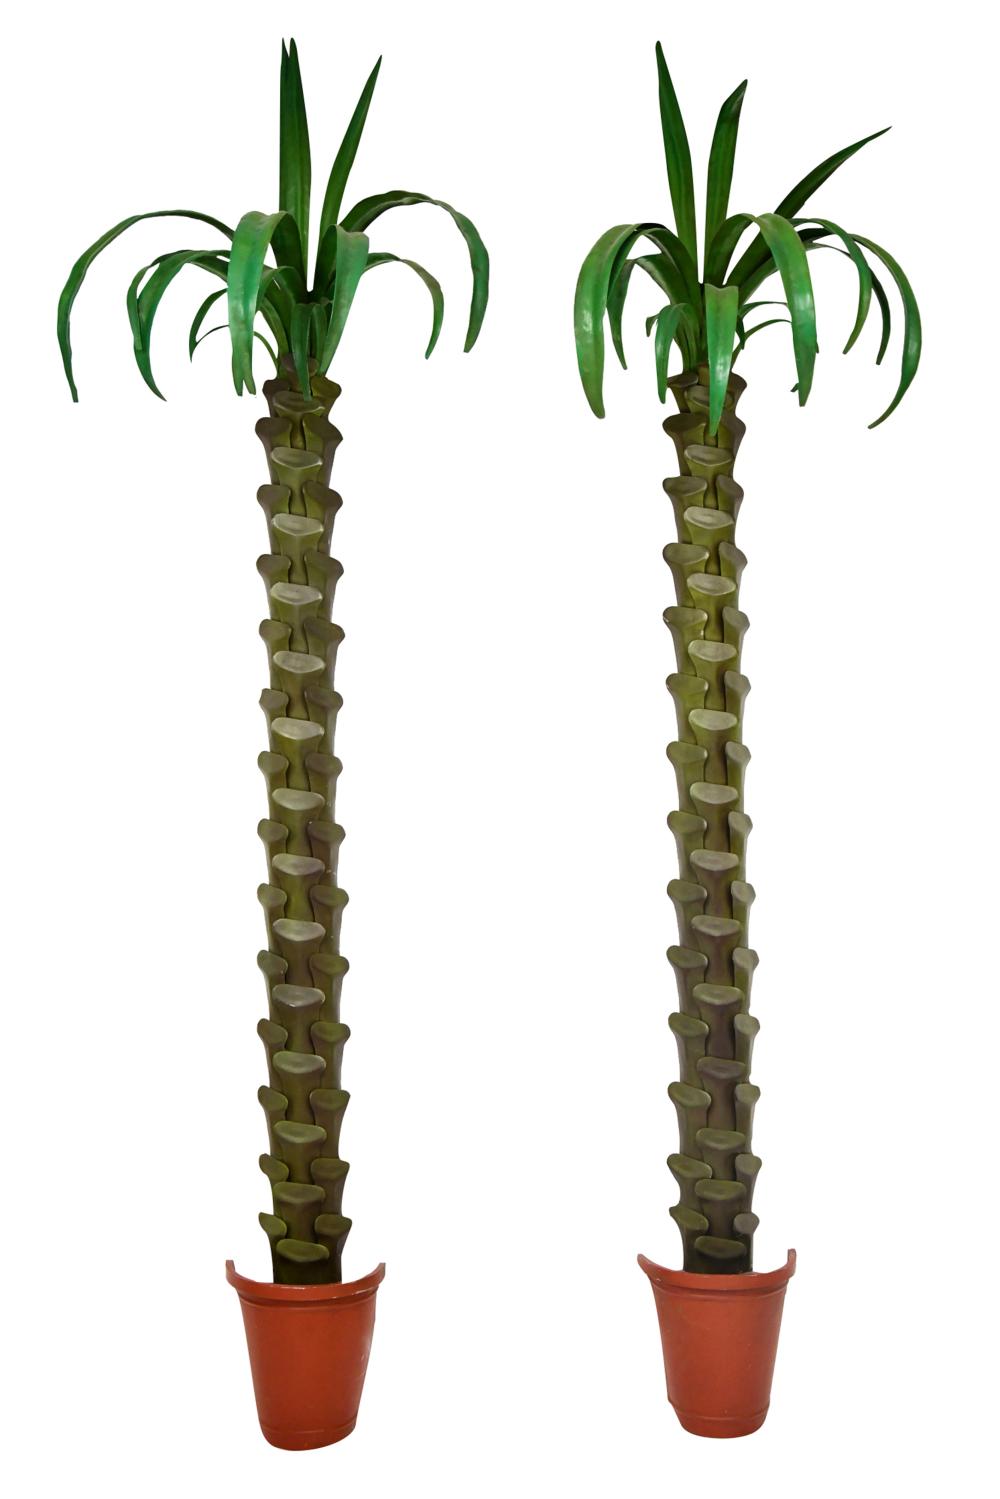 PAIR OF TOLE PALM-FORM RELIEFSCondition: